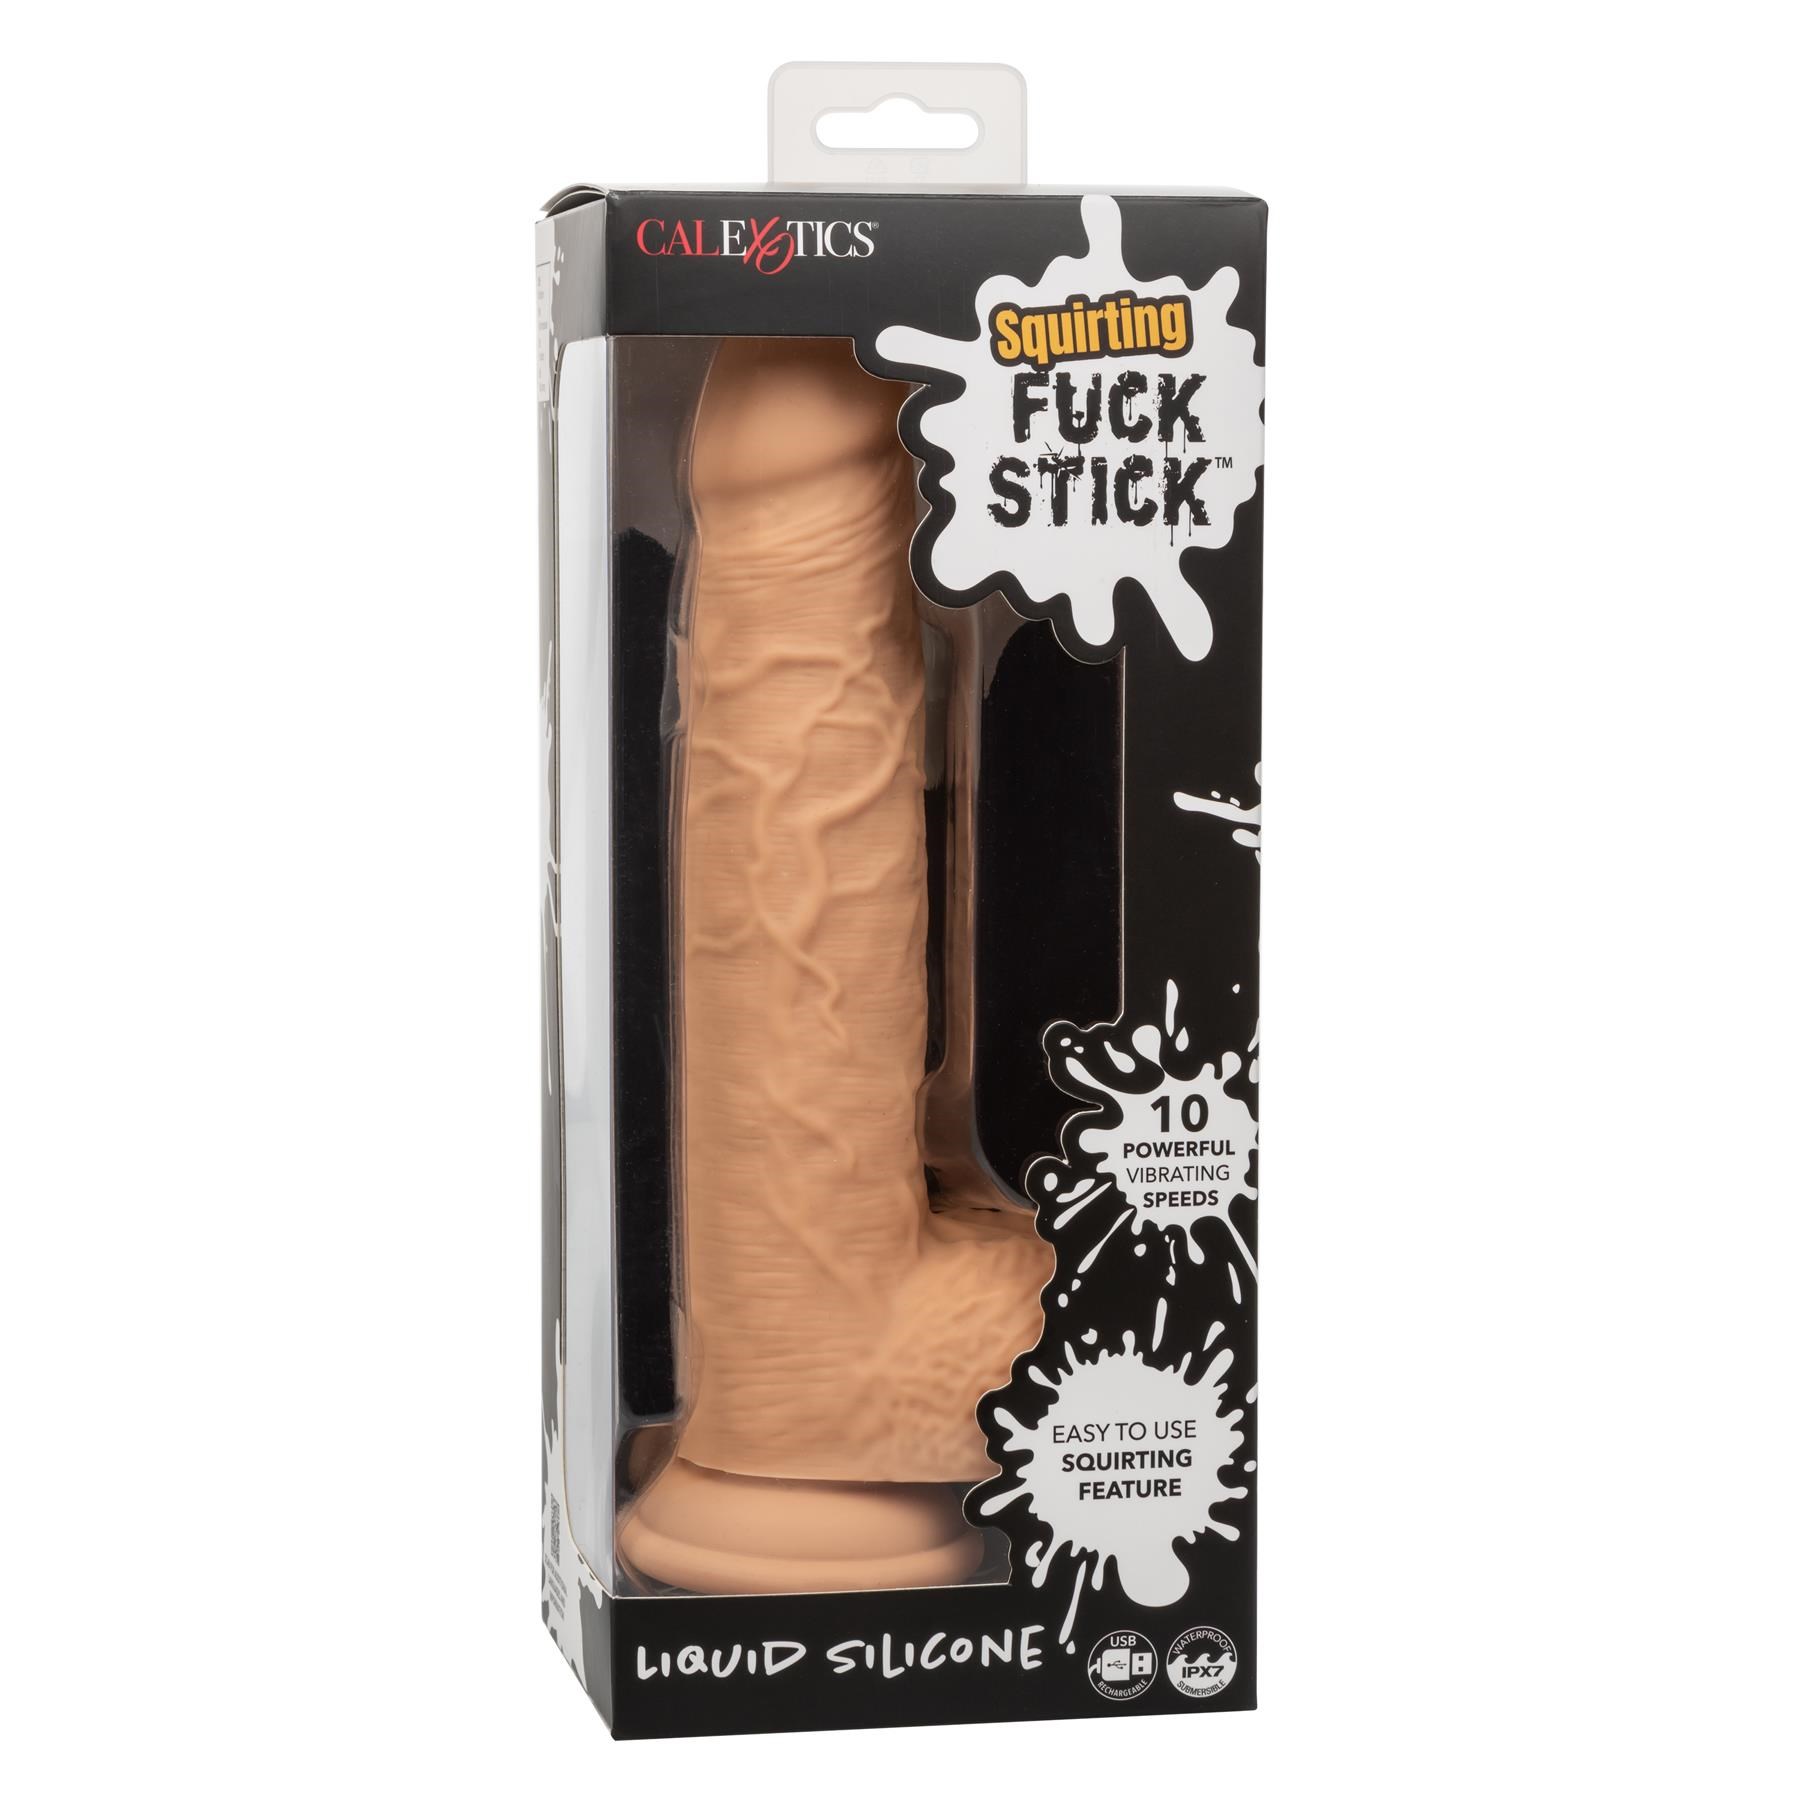 F*ck Stick Squirting and Vibrating Dildo- Packaging- White